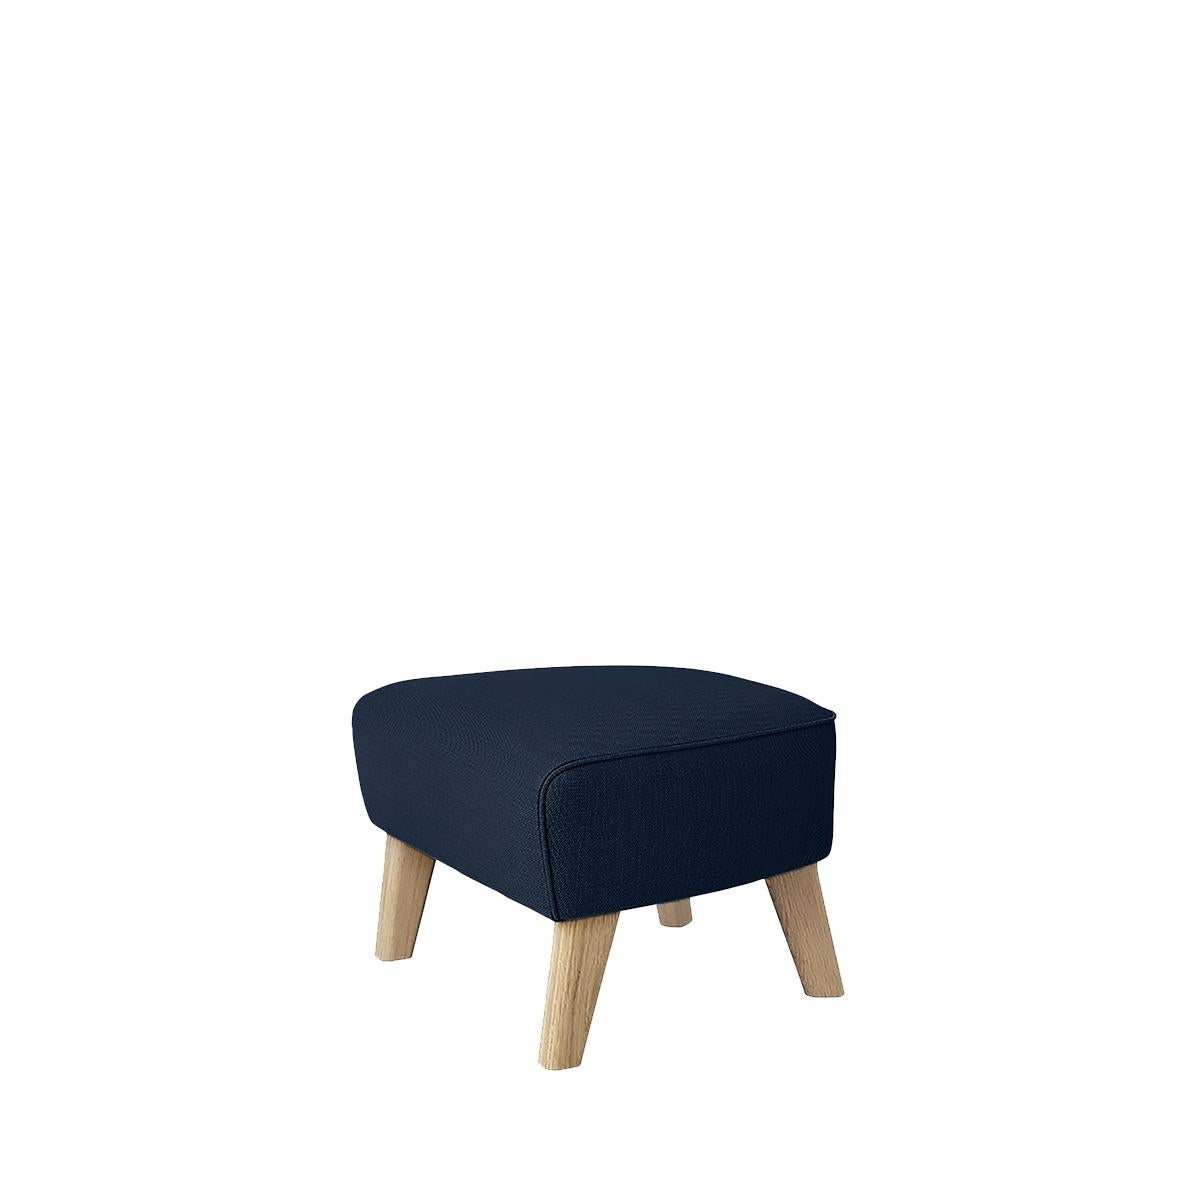 Blue and natural oak Sahco Zero footstool by Lassen
Dimensions: W 56 x D 58 x H 40 cm 
Materials: Textile
Also available: Other colors available,

The my own chair footstool has been designed in the same spirit as Flemming Lassen’s original